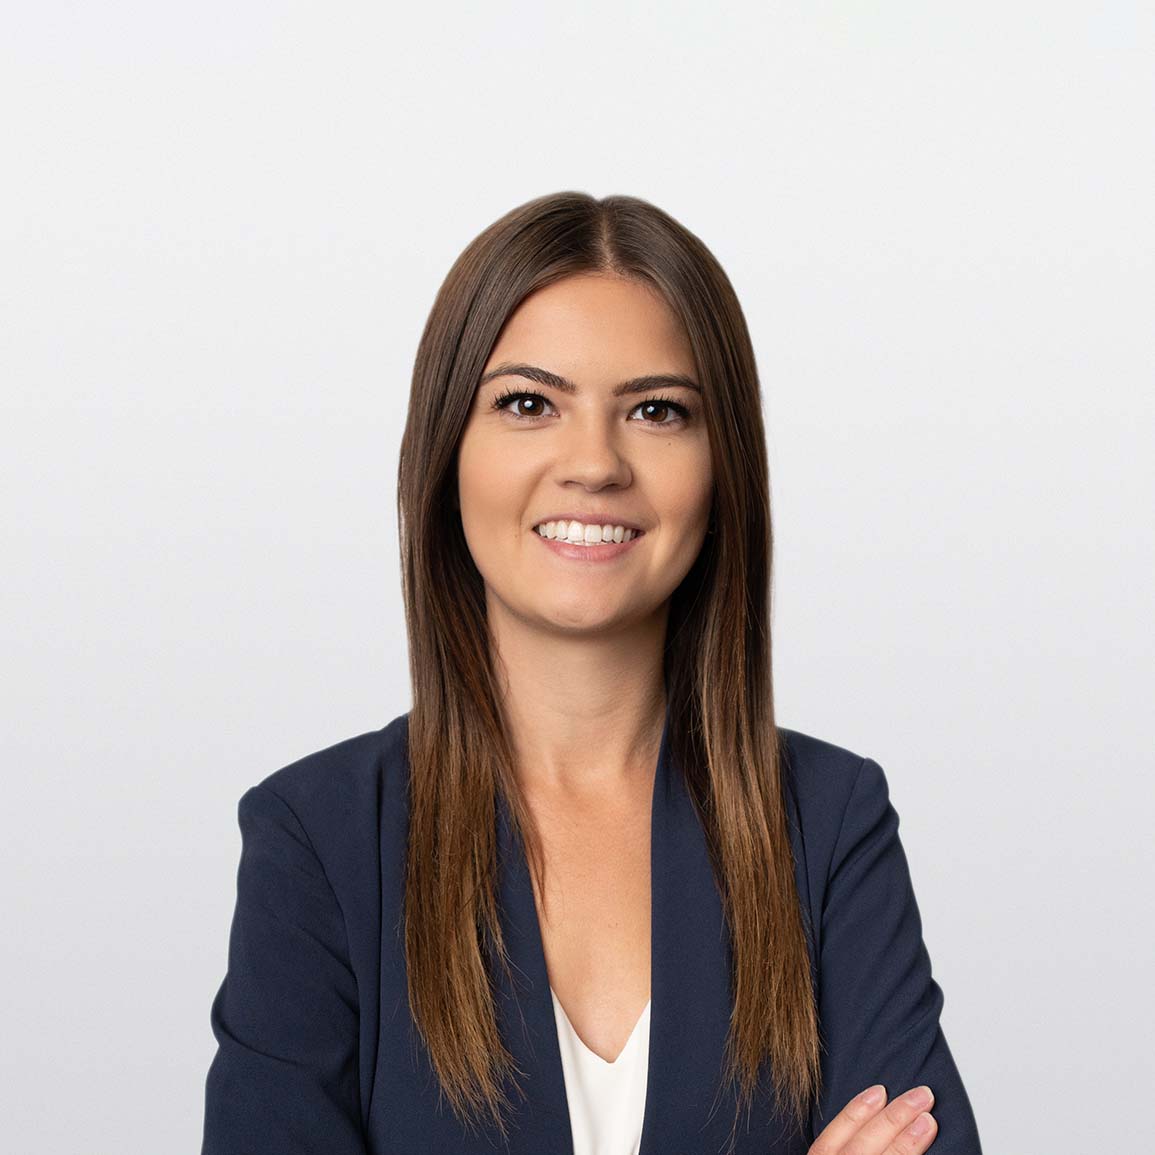 Image of Caylee Mowbray Financial Advisor on white background